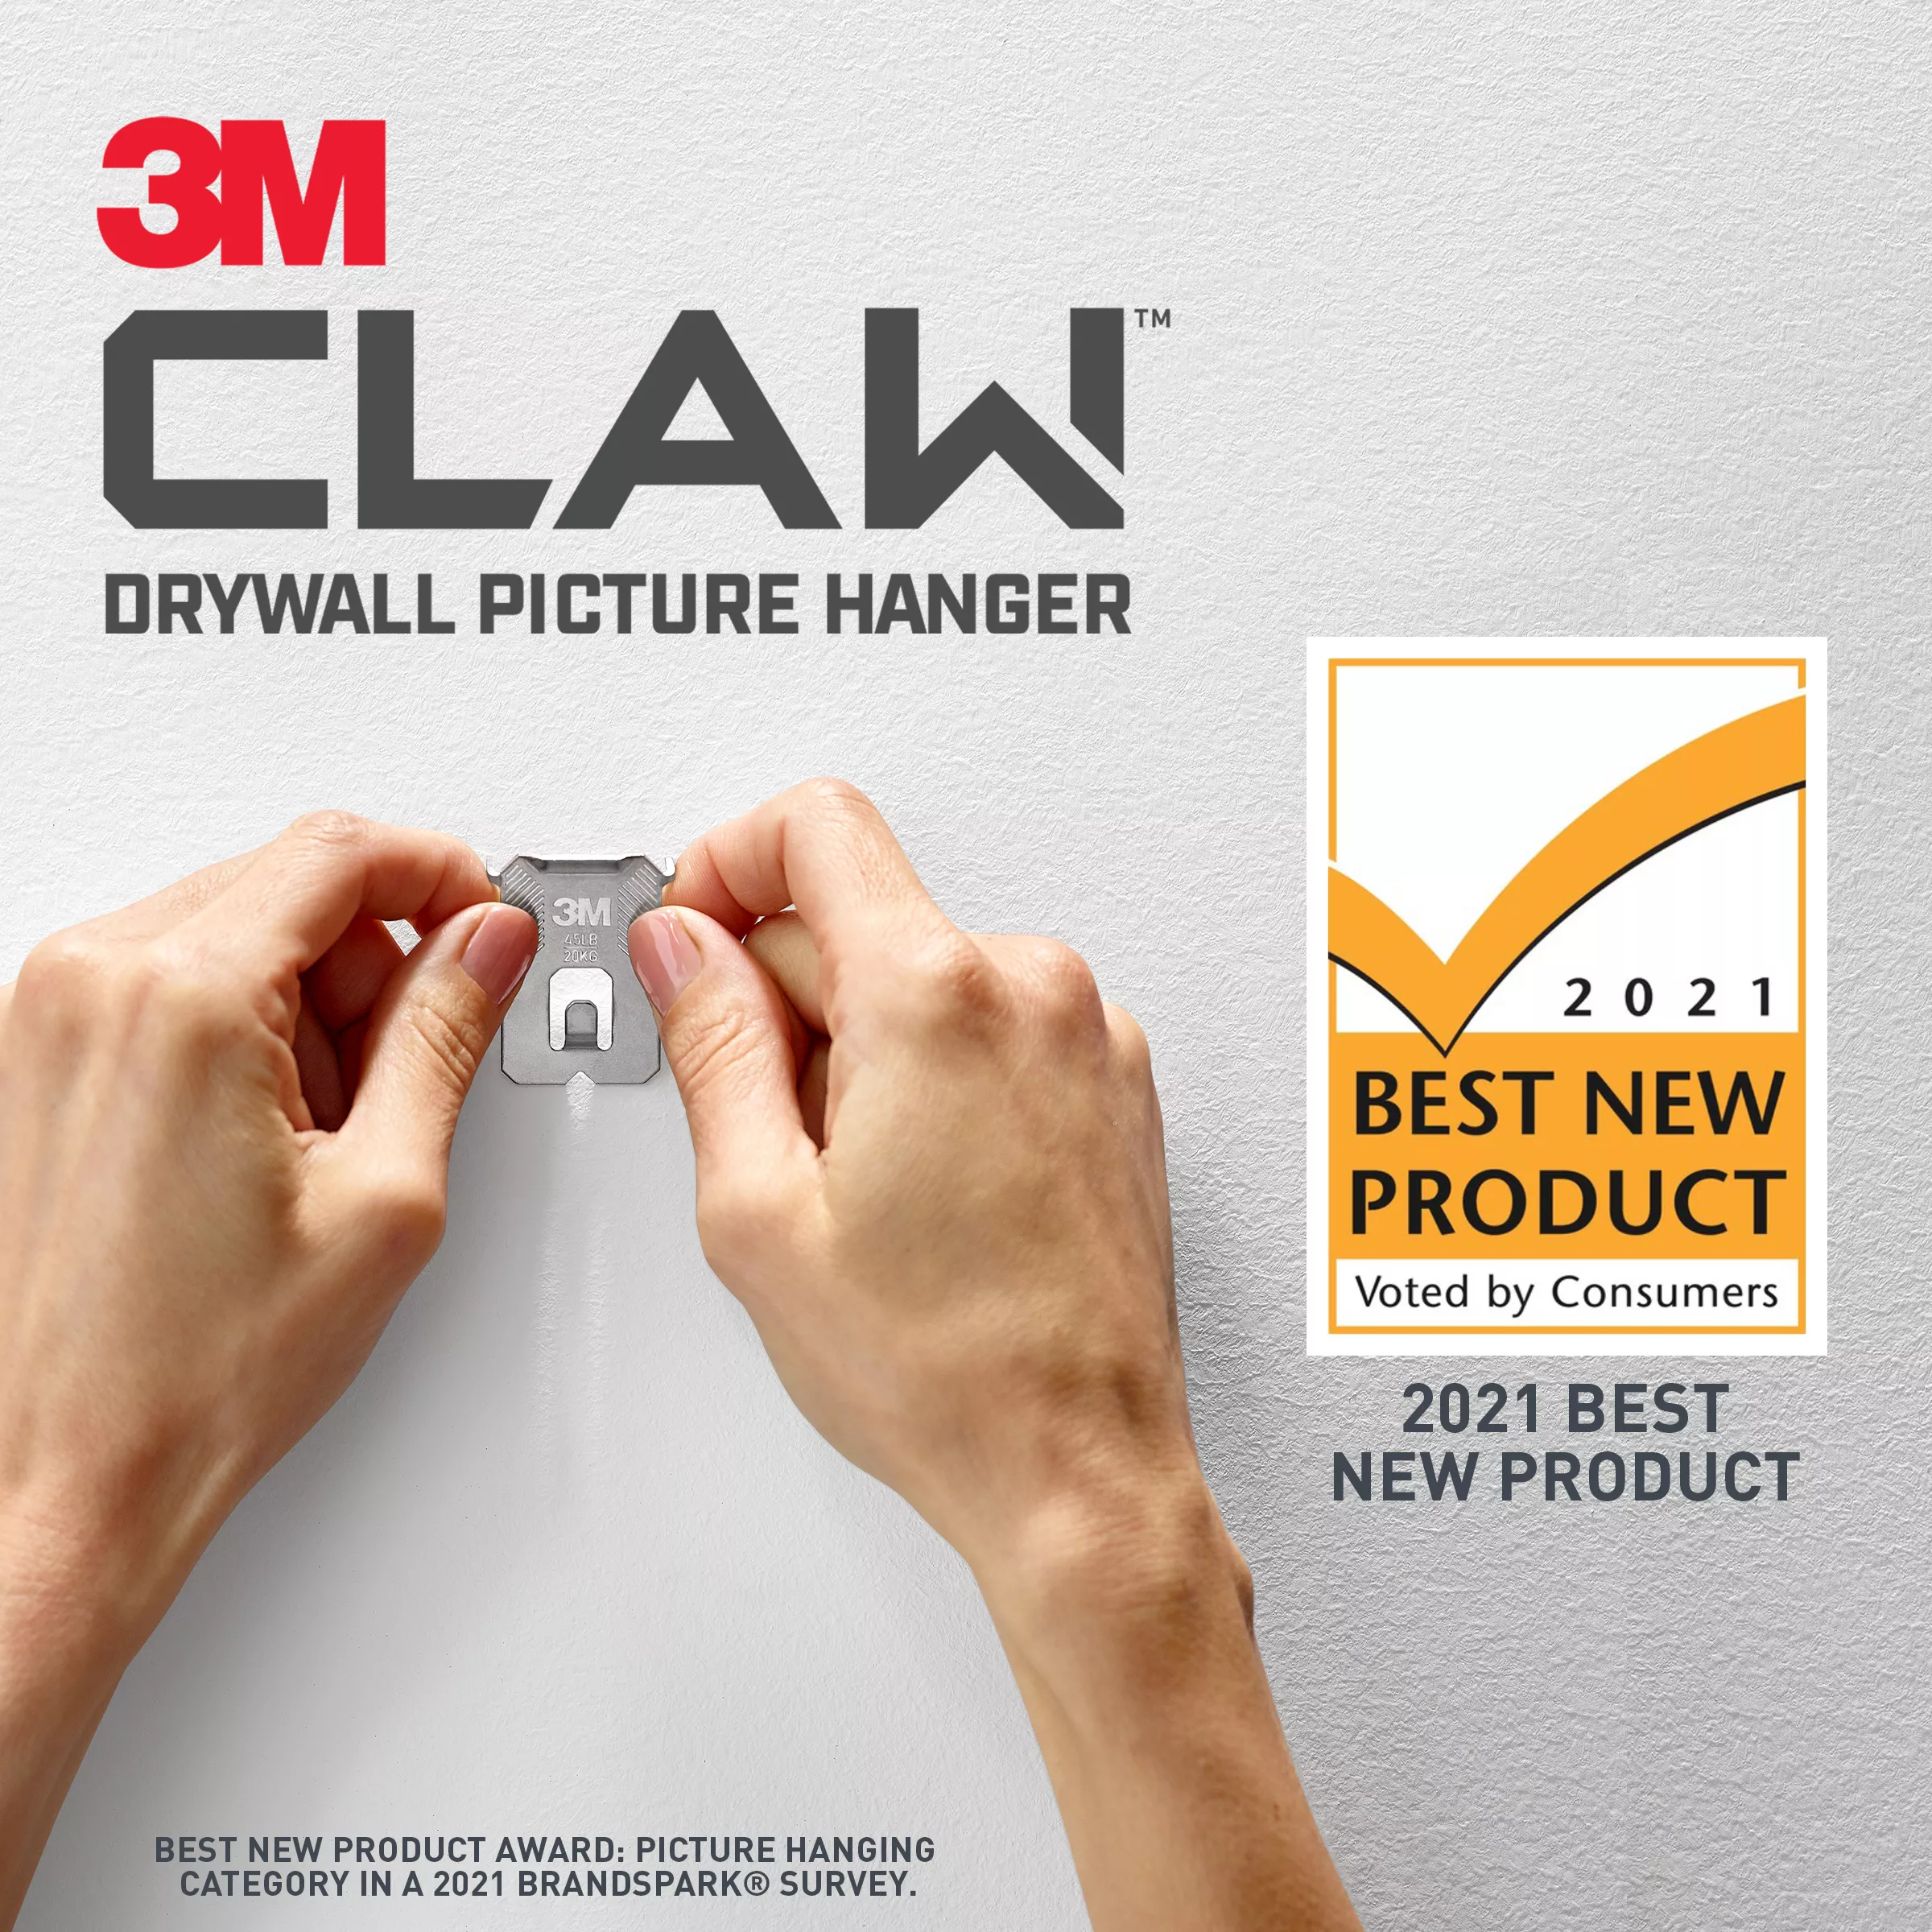 SKU 7100227276 | 3M CLAW™ Drywall Picture Hanger 25 lb 3PH25-1EF